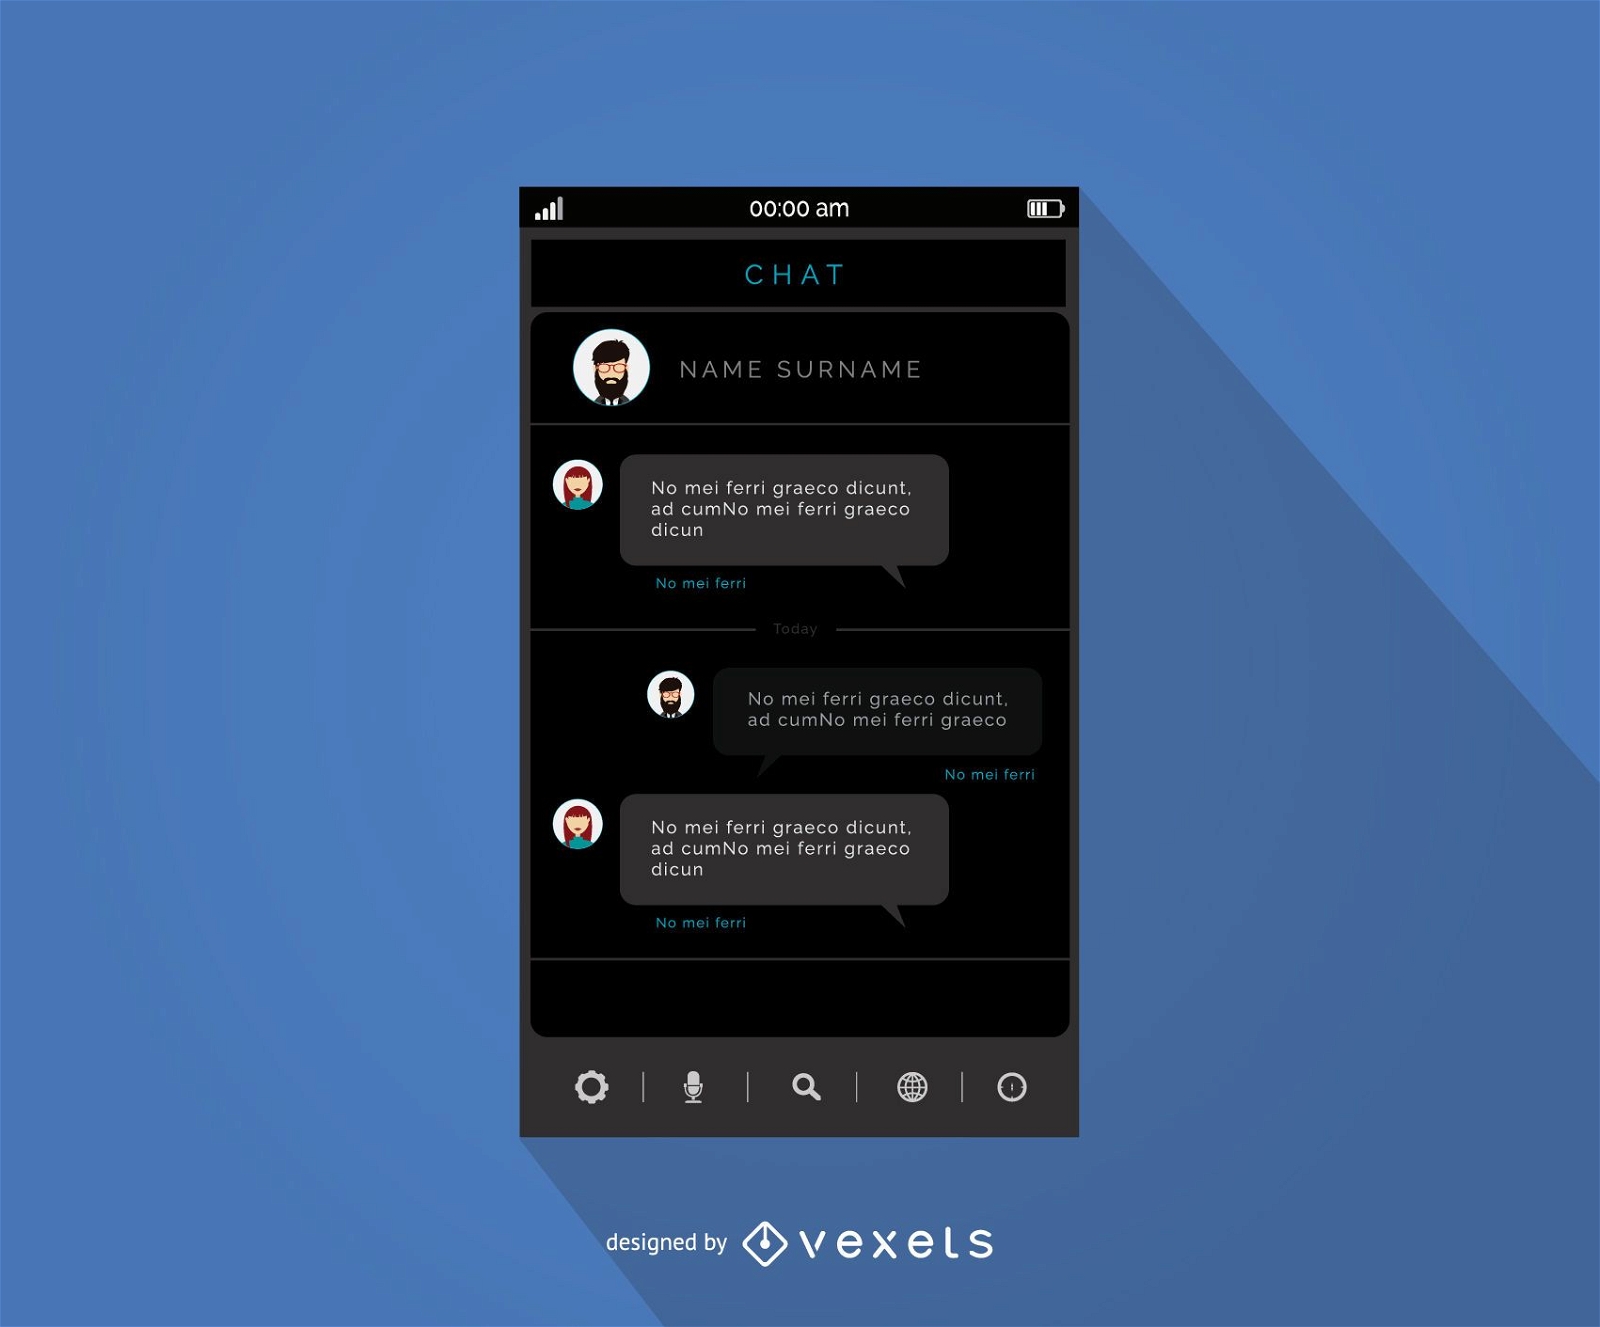 Mobile chat application interface design